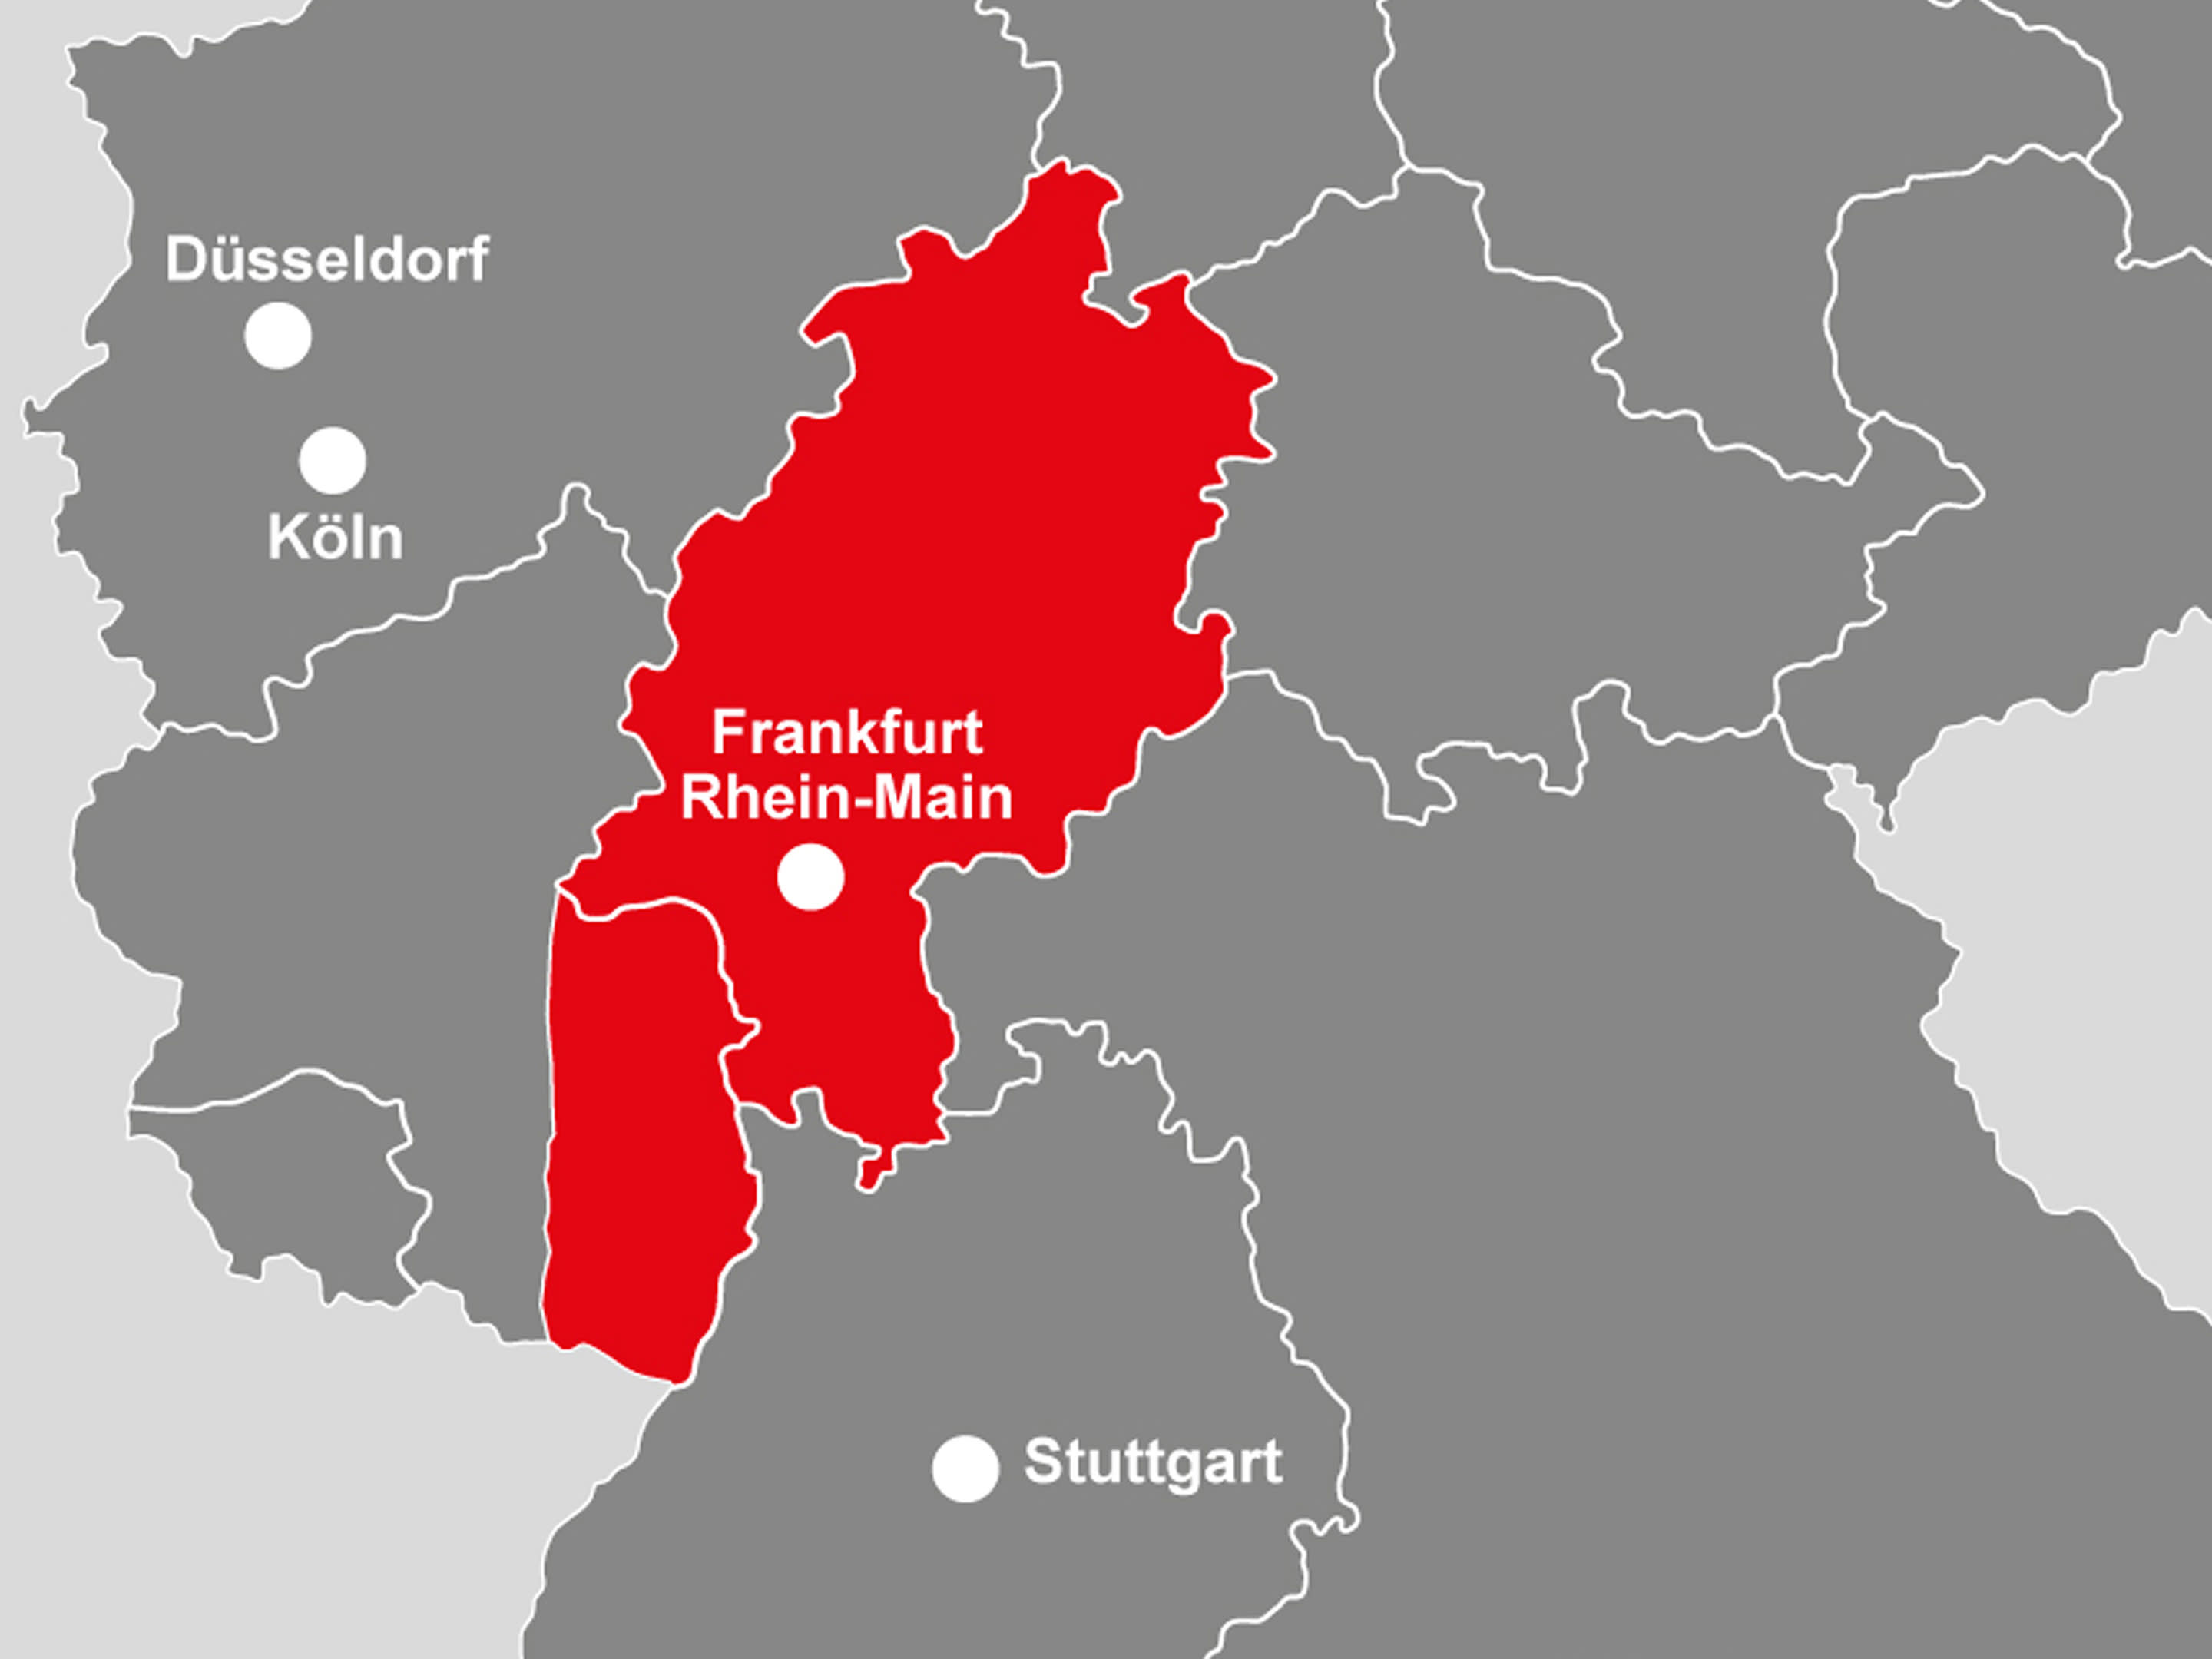  Image: geographical area map of STRABAG Real Estate, Rhine-Main area